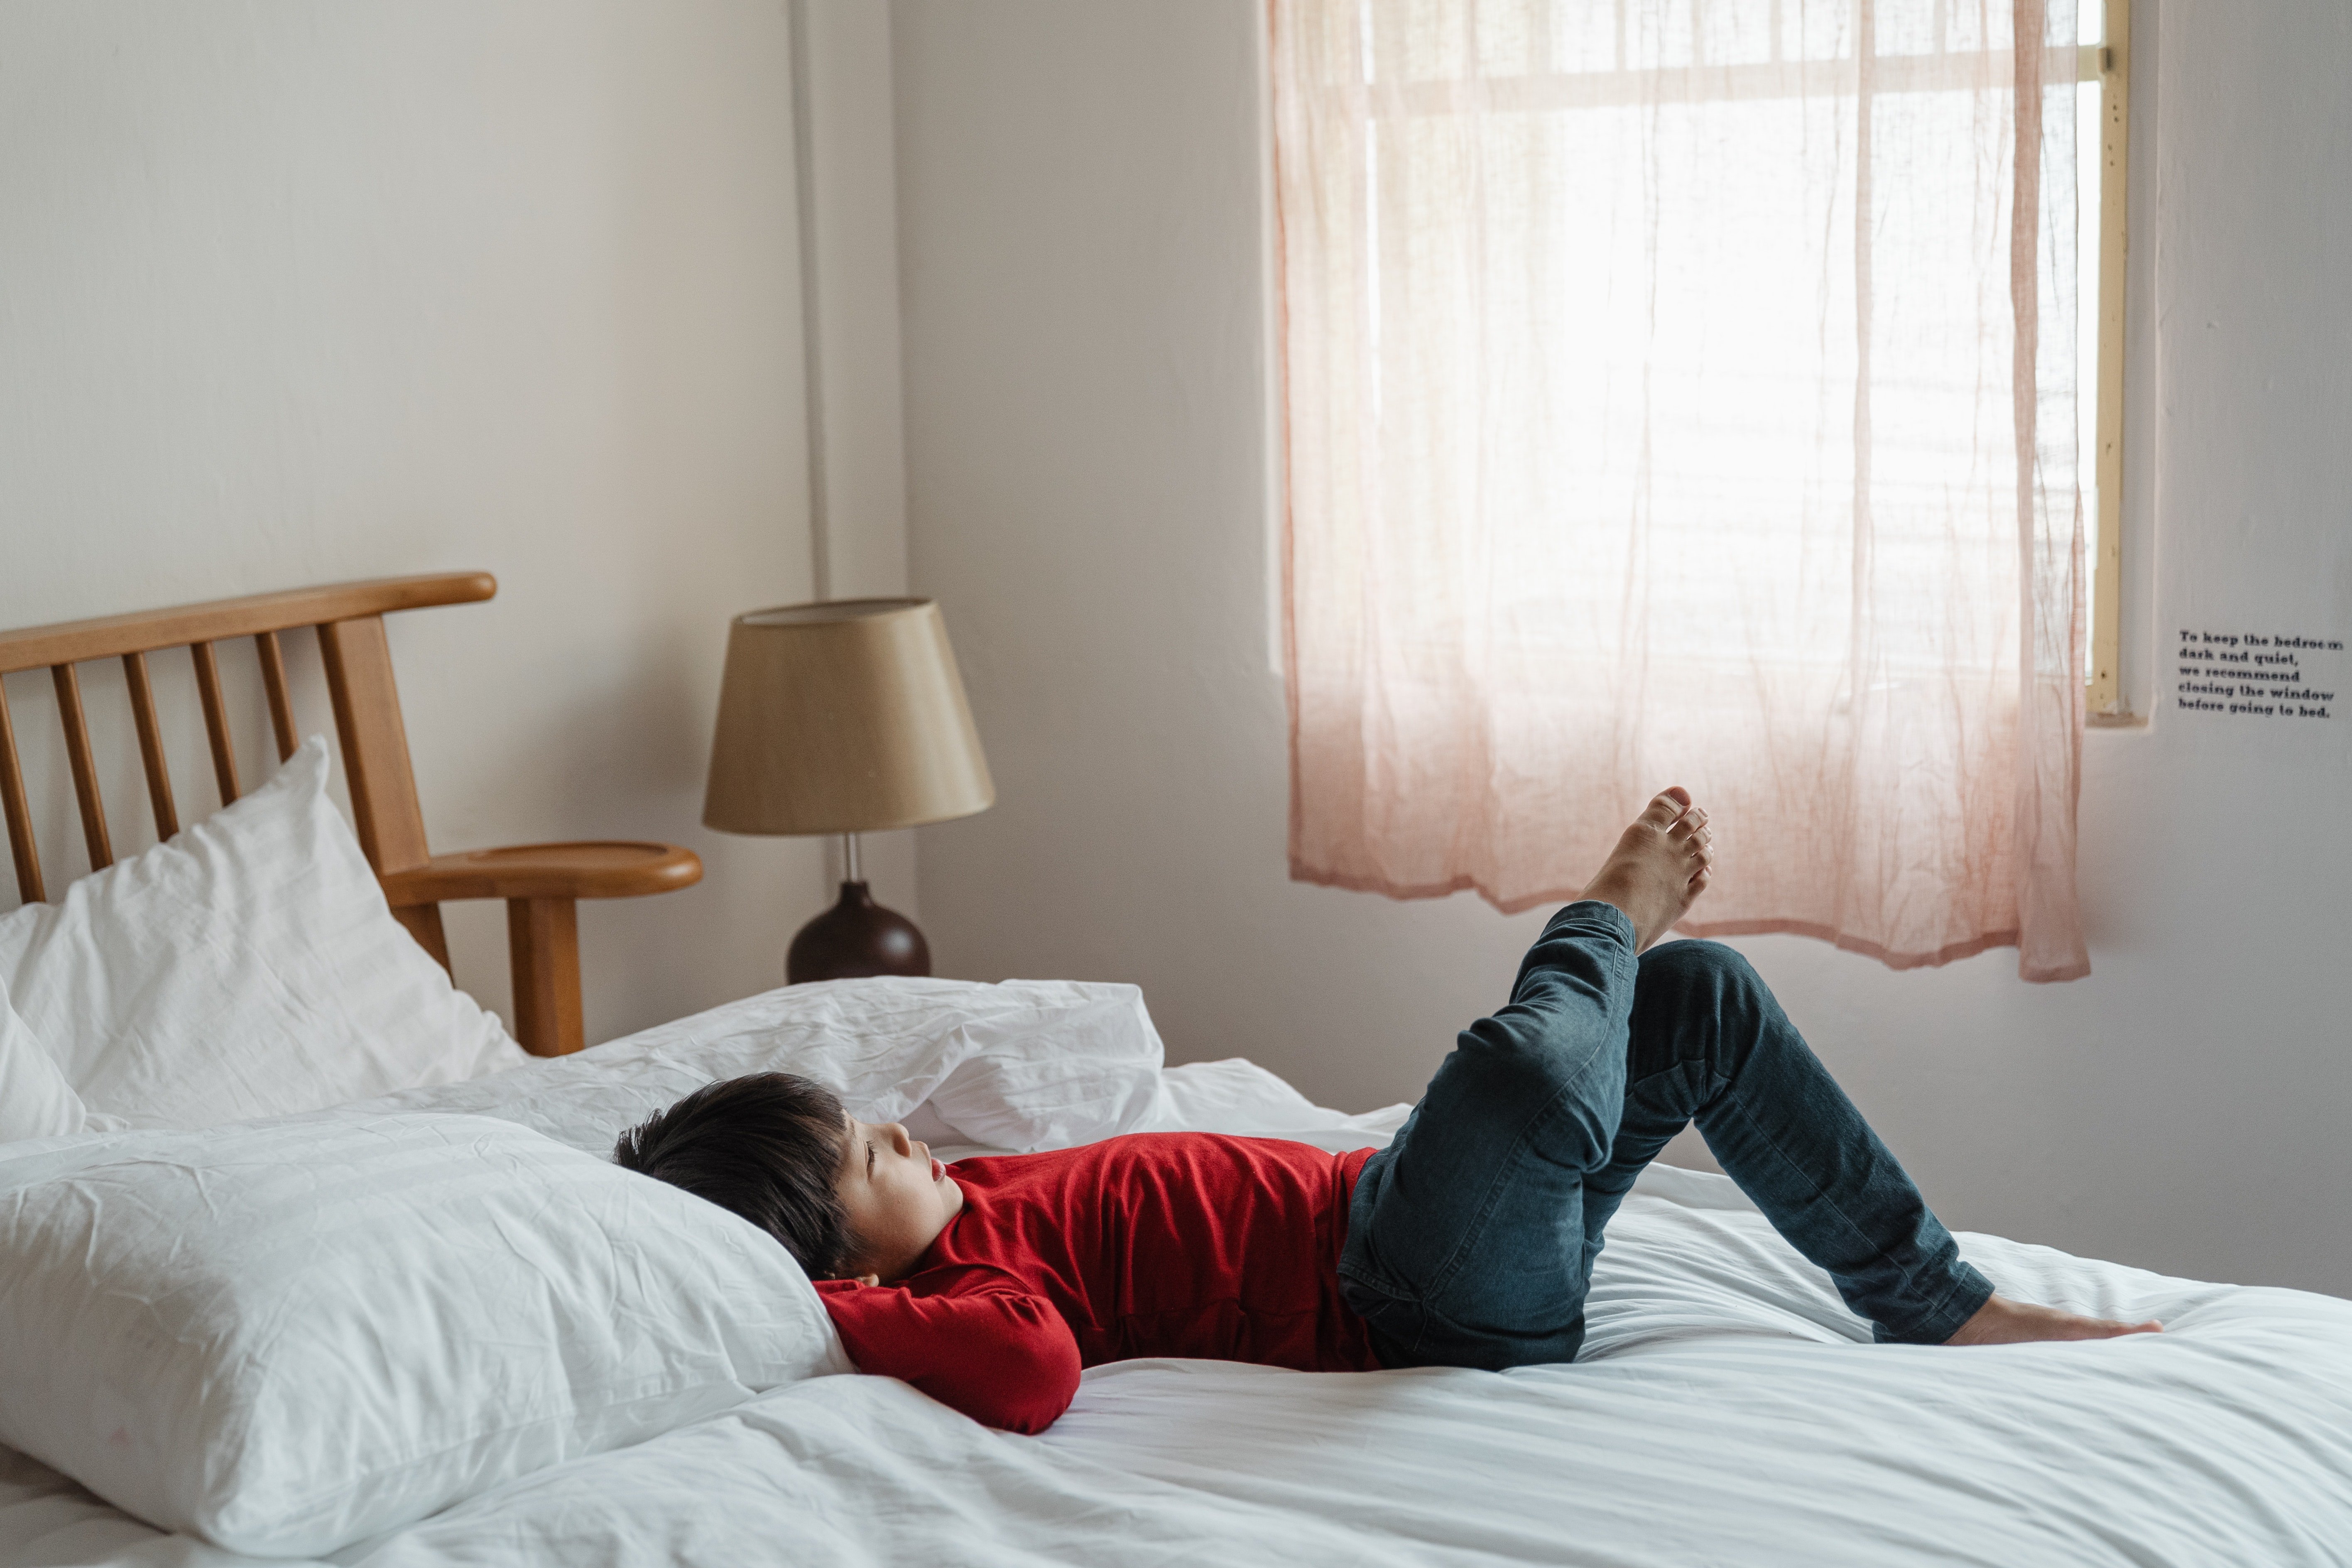 Pictured - An image of a boy lying on the bed with his leg up | Source: Pexels 